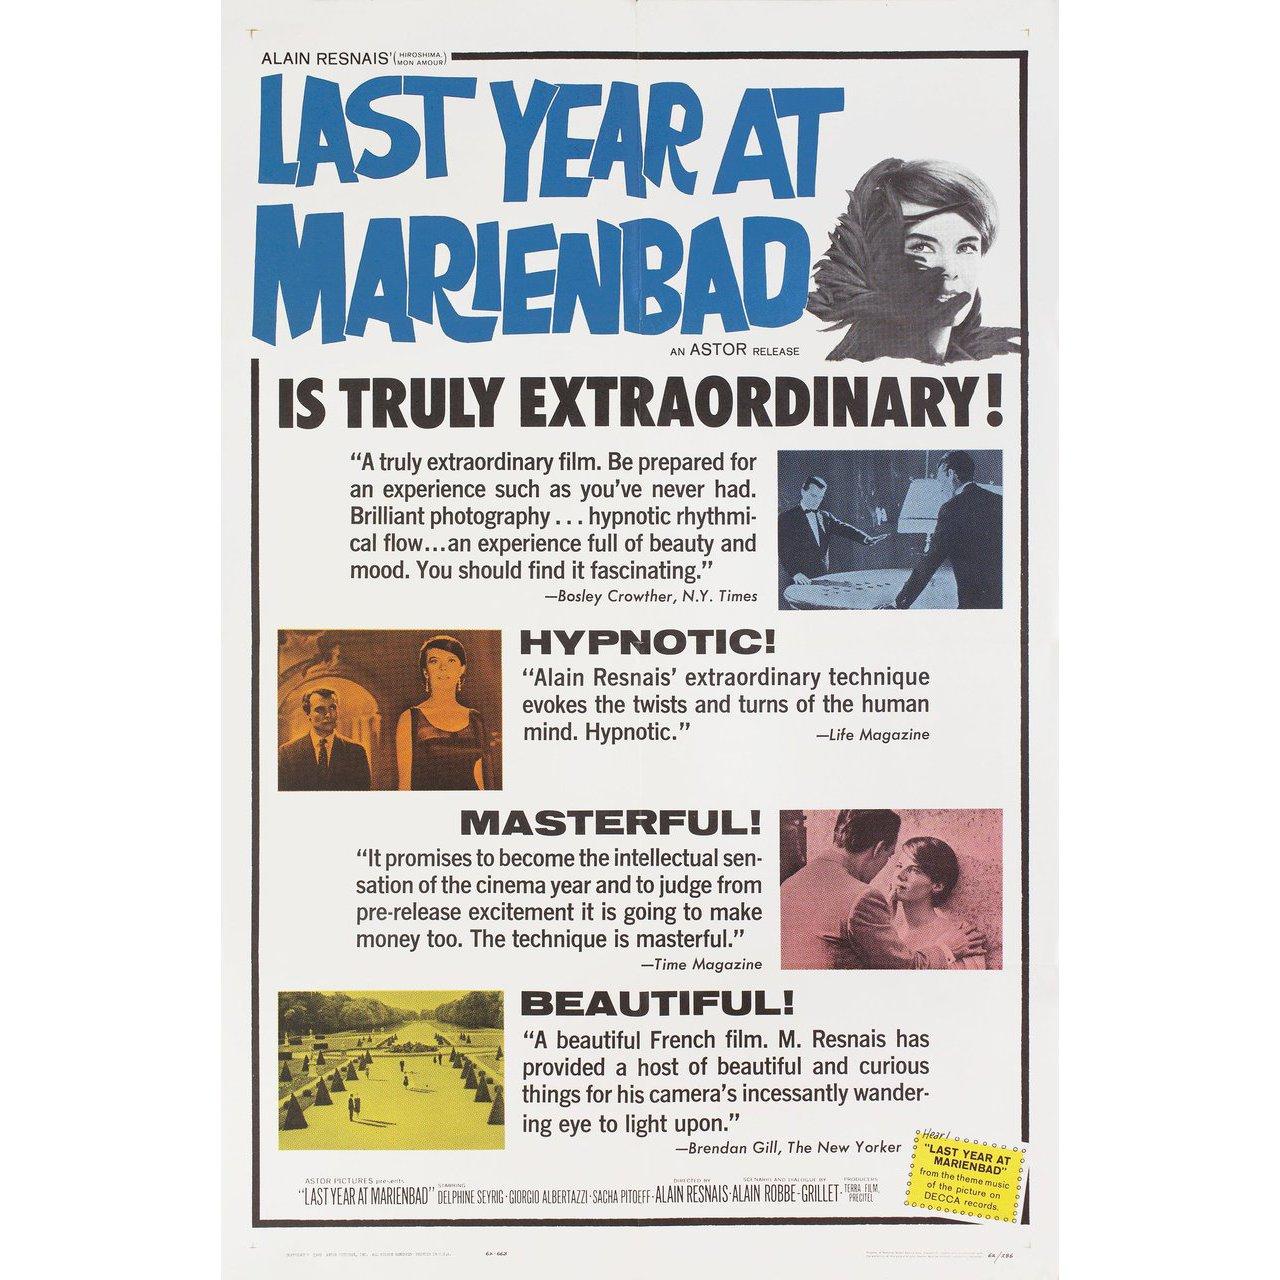 Original 1962 U.S. one sheet poster for the first U.S. theatrical release of the film Last Year at Marienbad (L'Annee derniere a Marienbad) directed by Alain Resnais with Delphine Seyrig / Giorgio Albertazzi / Sacha Pitoeff / Francoise Bertin. Very